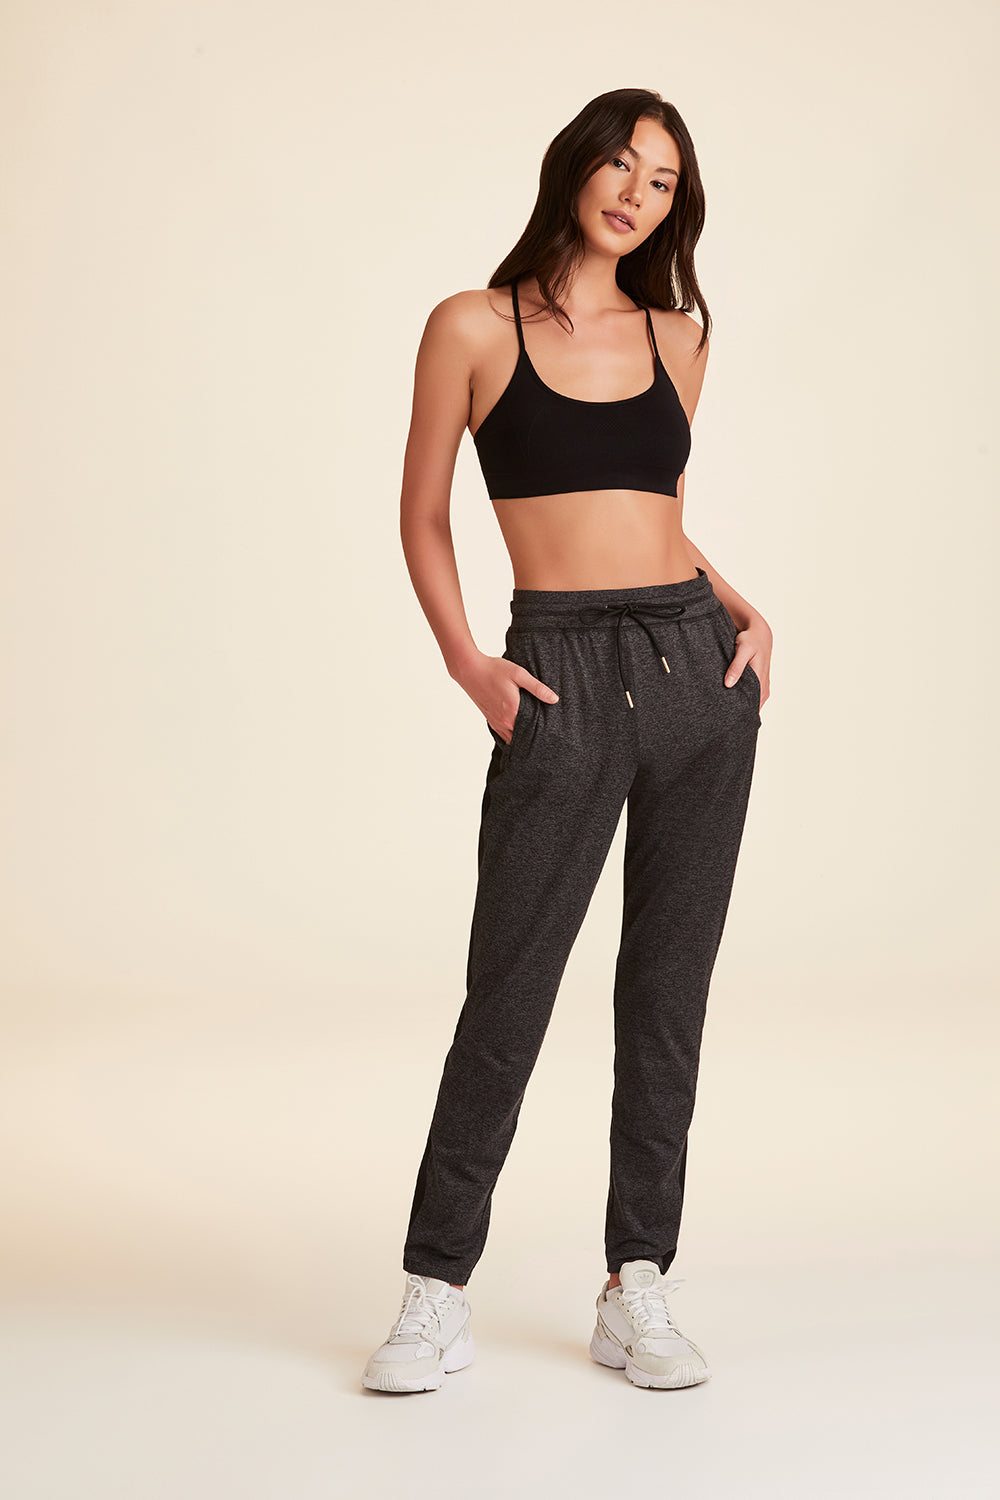 Athleisure Pants for Women